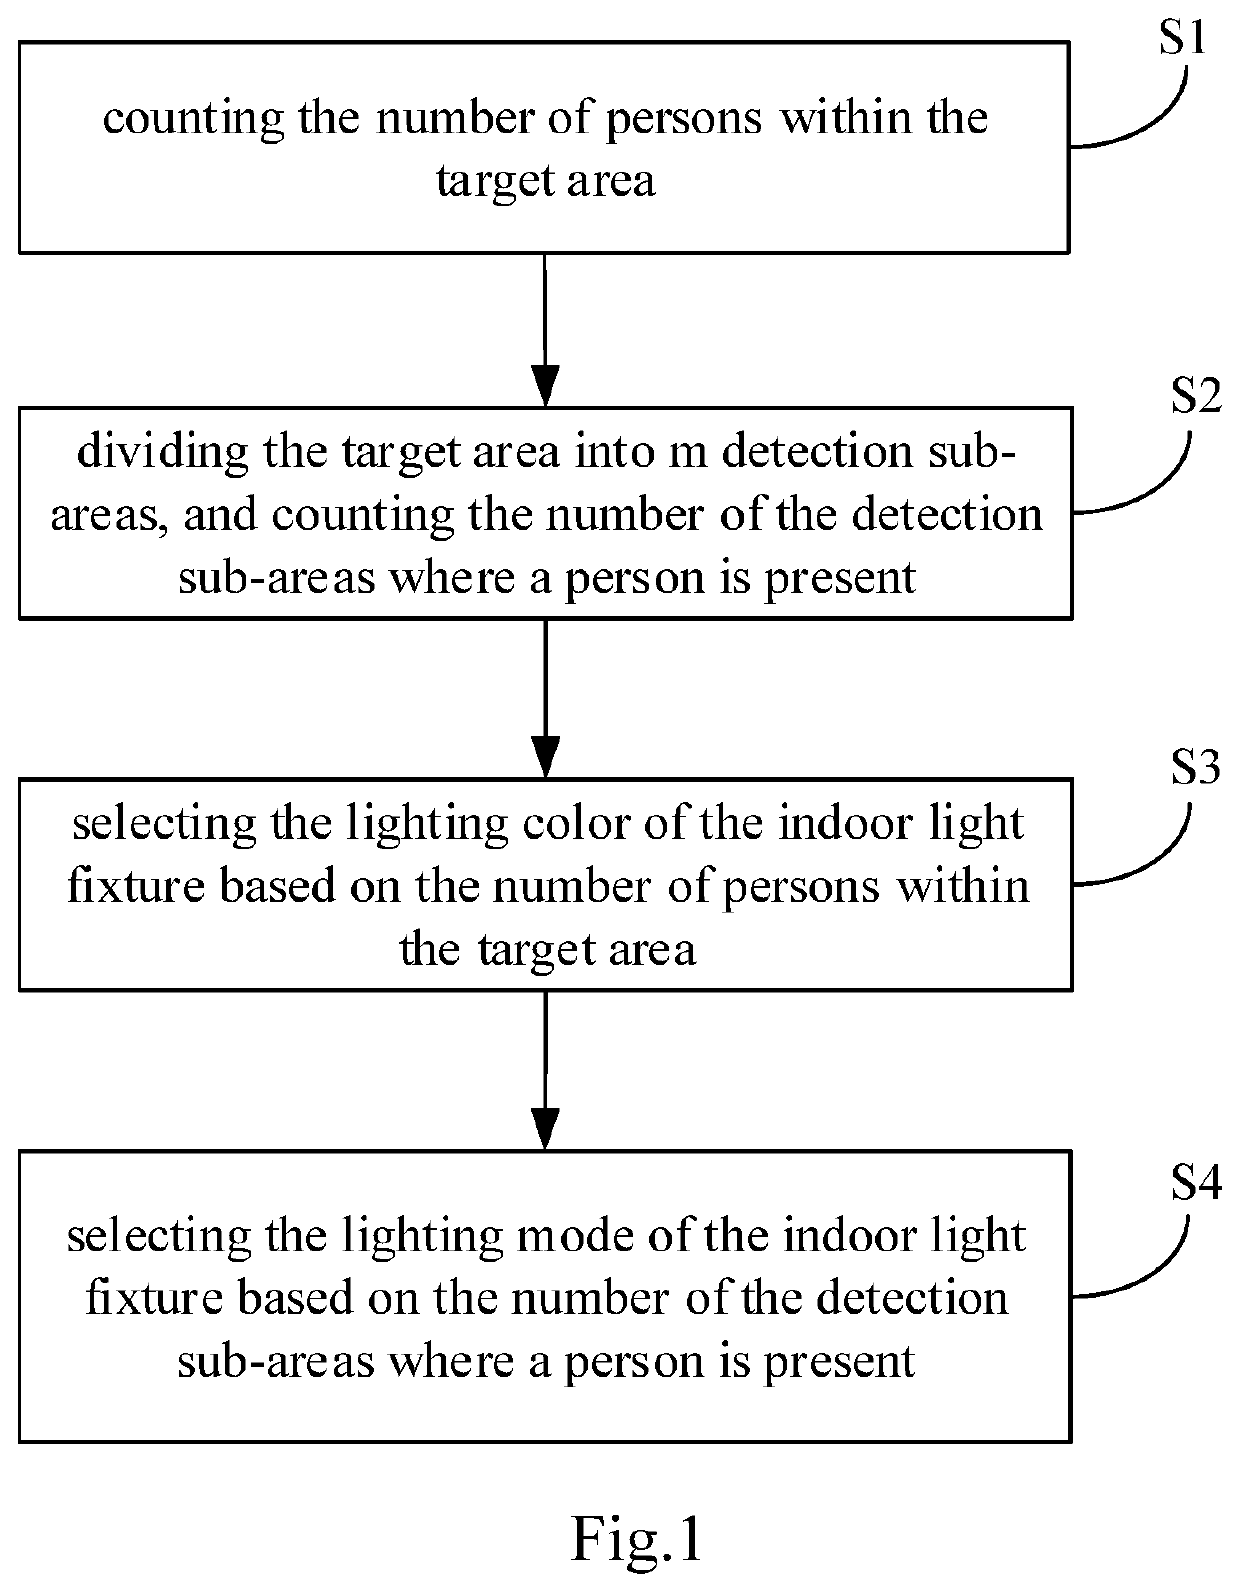 Intelligent lighting control method based on the number of persons